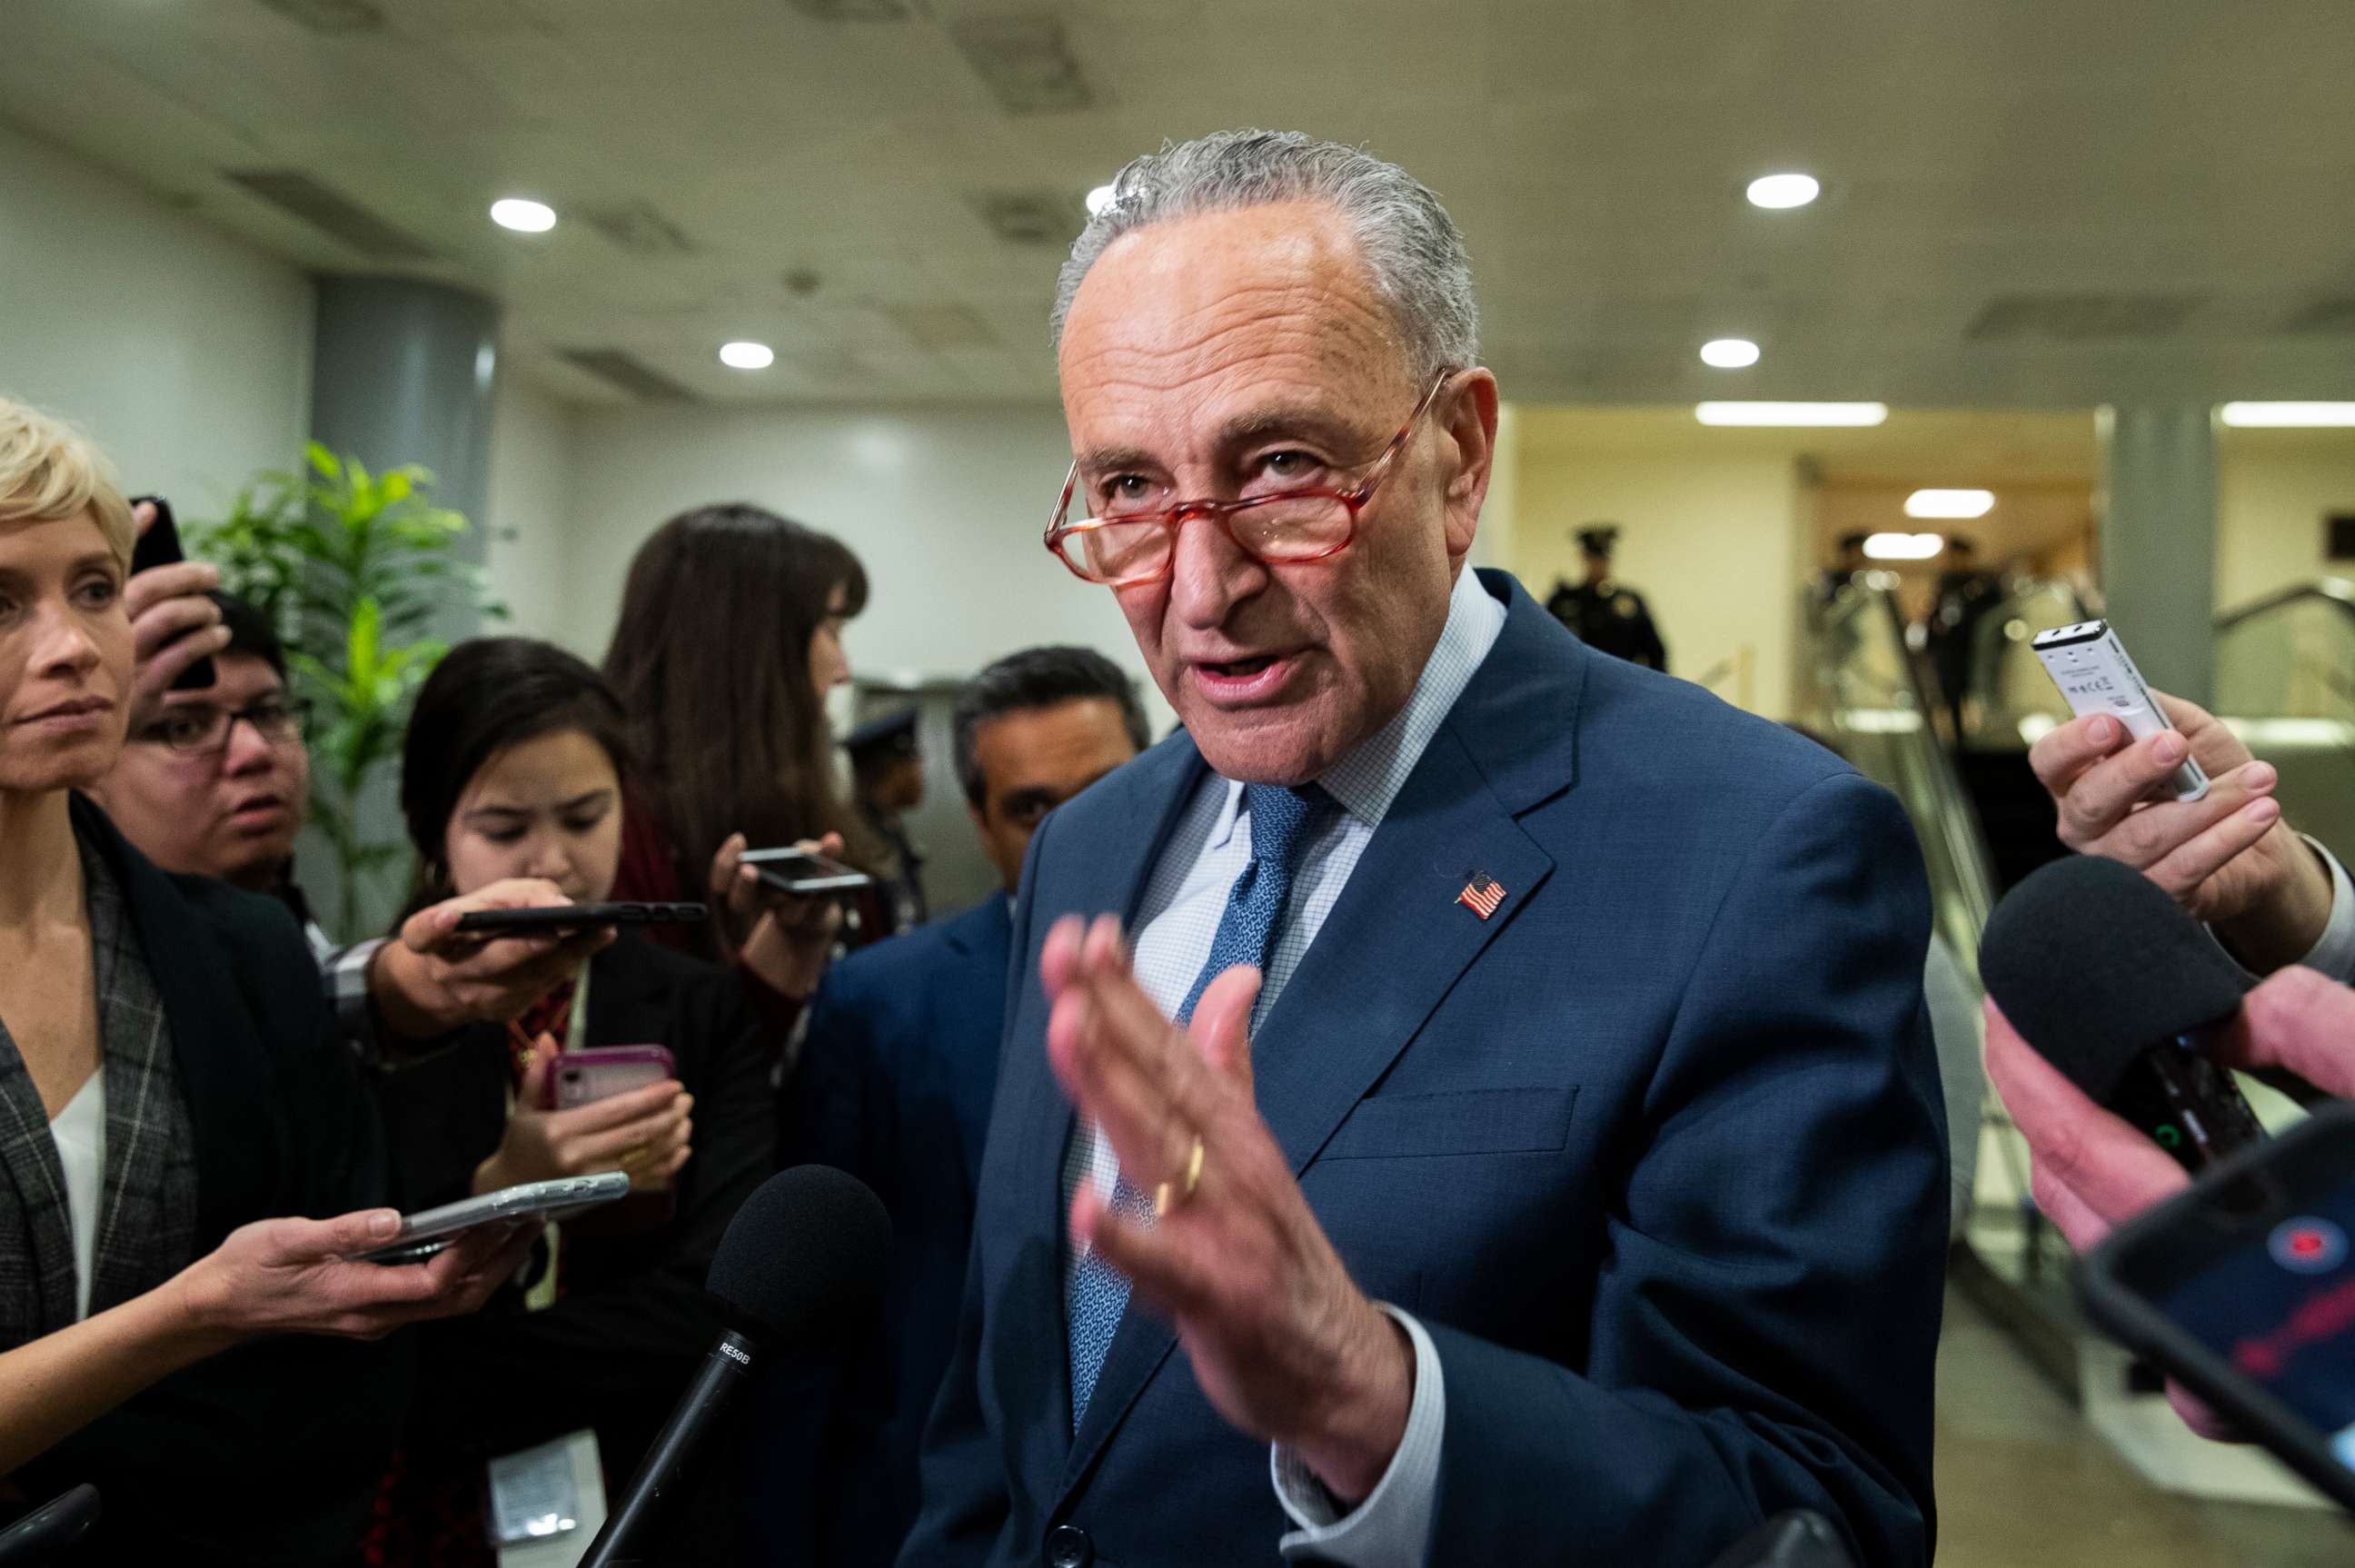 PHOTO: Sen. Chuck Schumer speaks to reporters during a brief recess on the first full day of the impeachment trial of President Donald Trump, on Capitol Hill in Washington, Jan. 21, 2020.